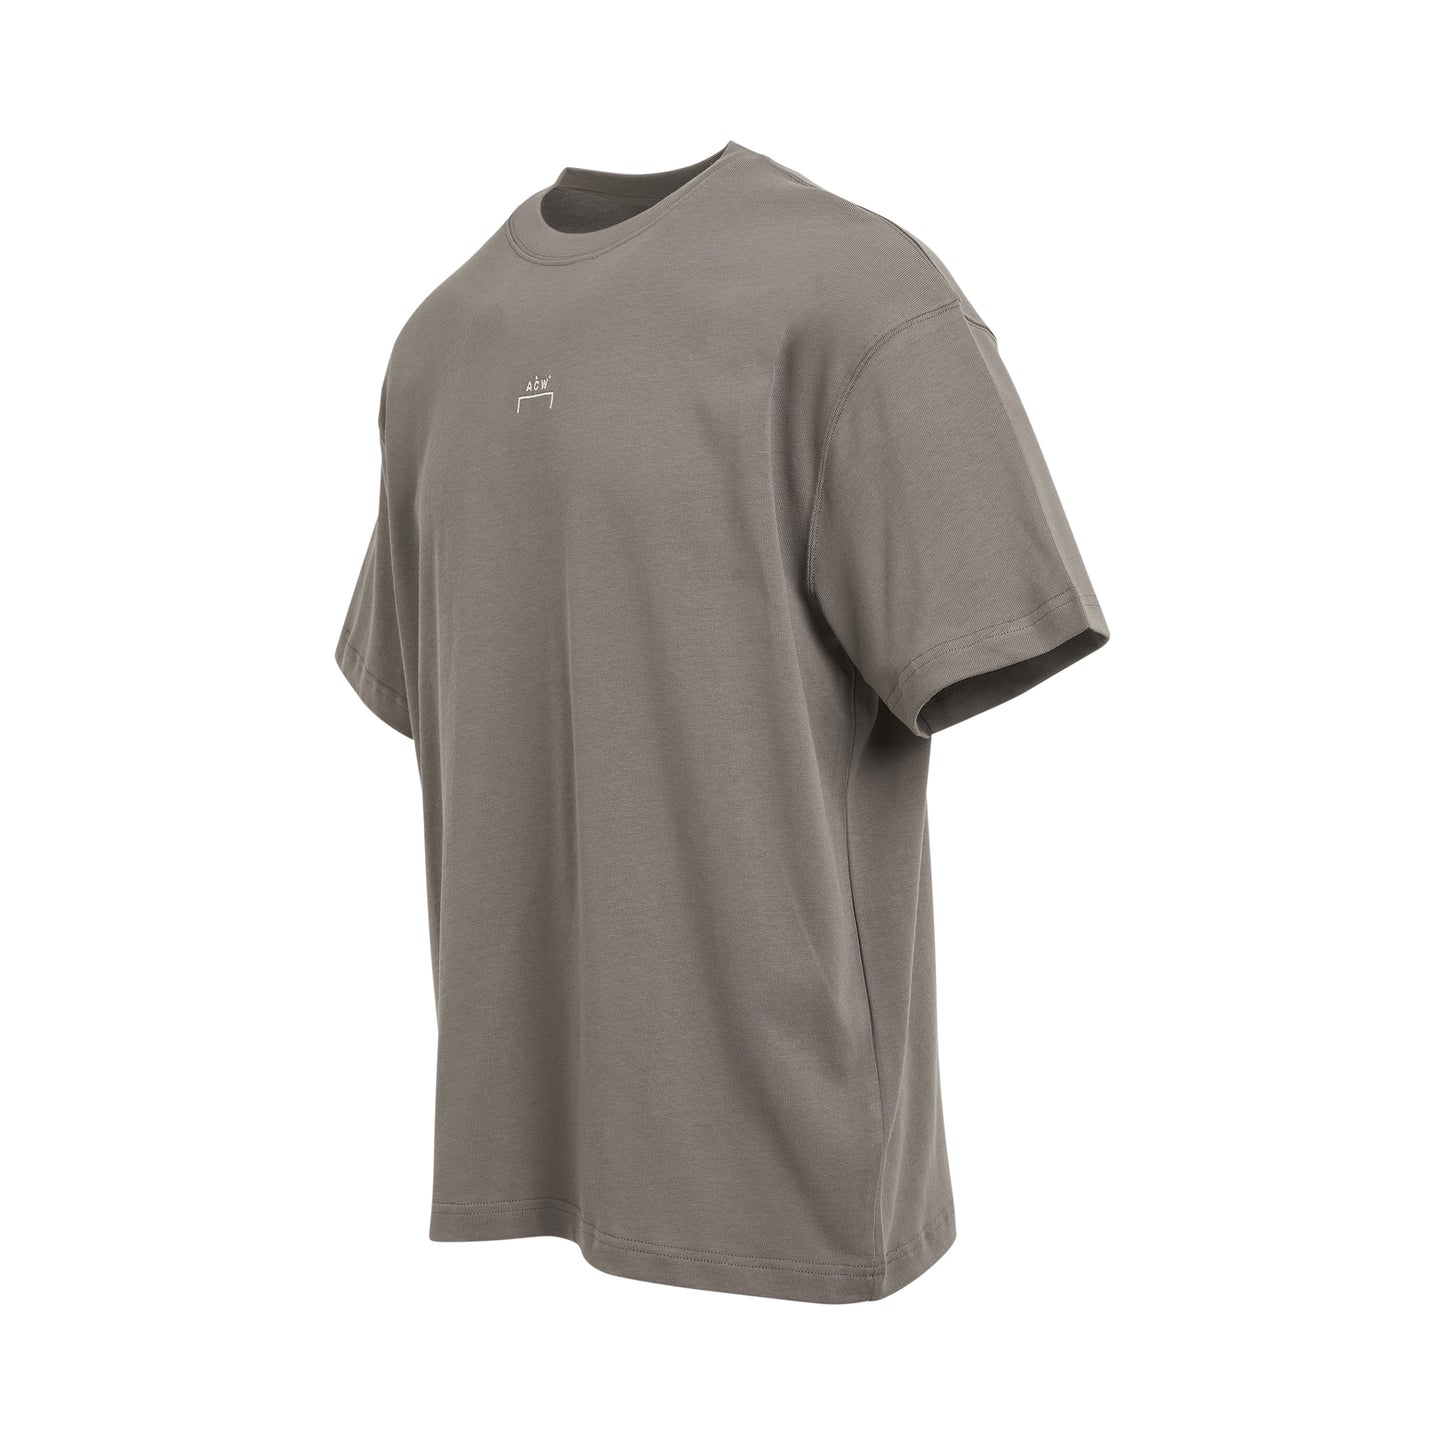 Essential T-Shirt in Mid Grey